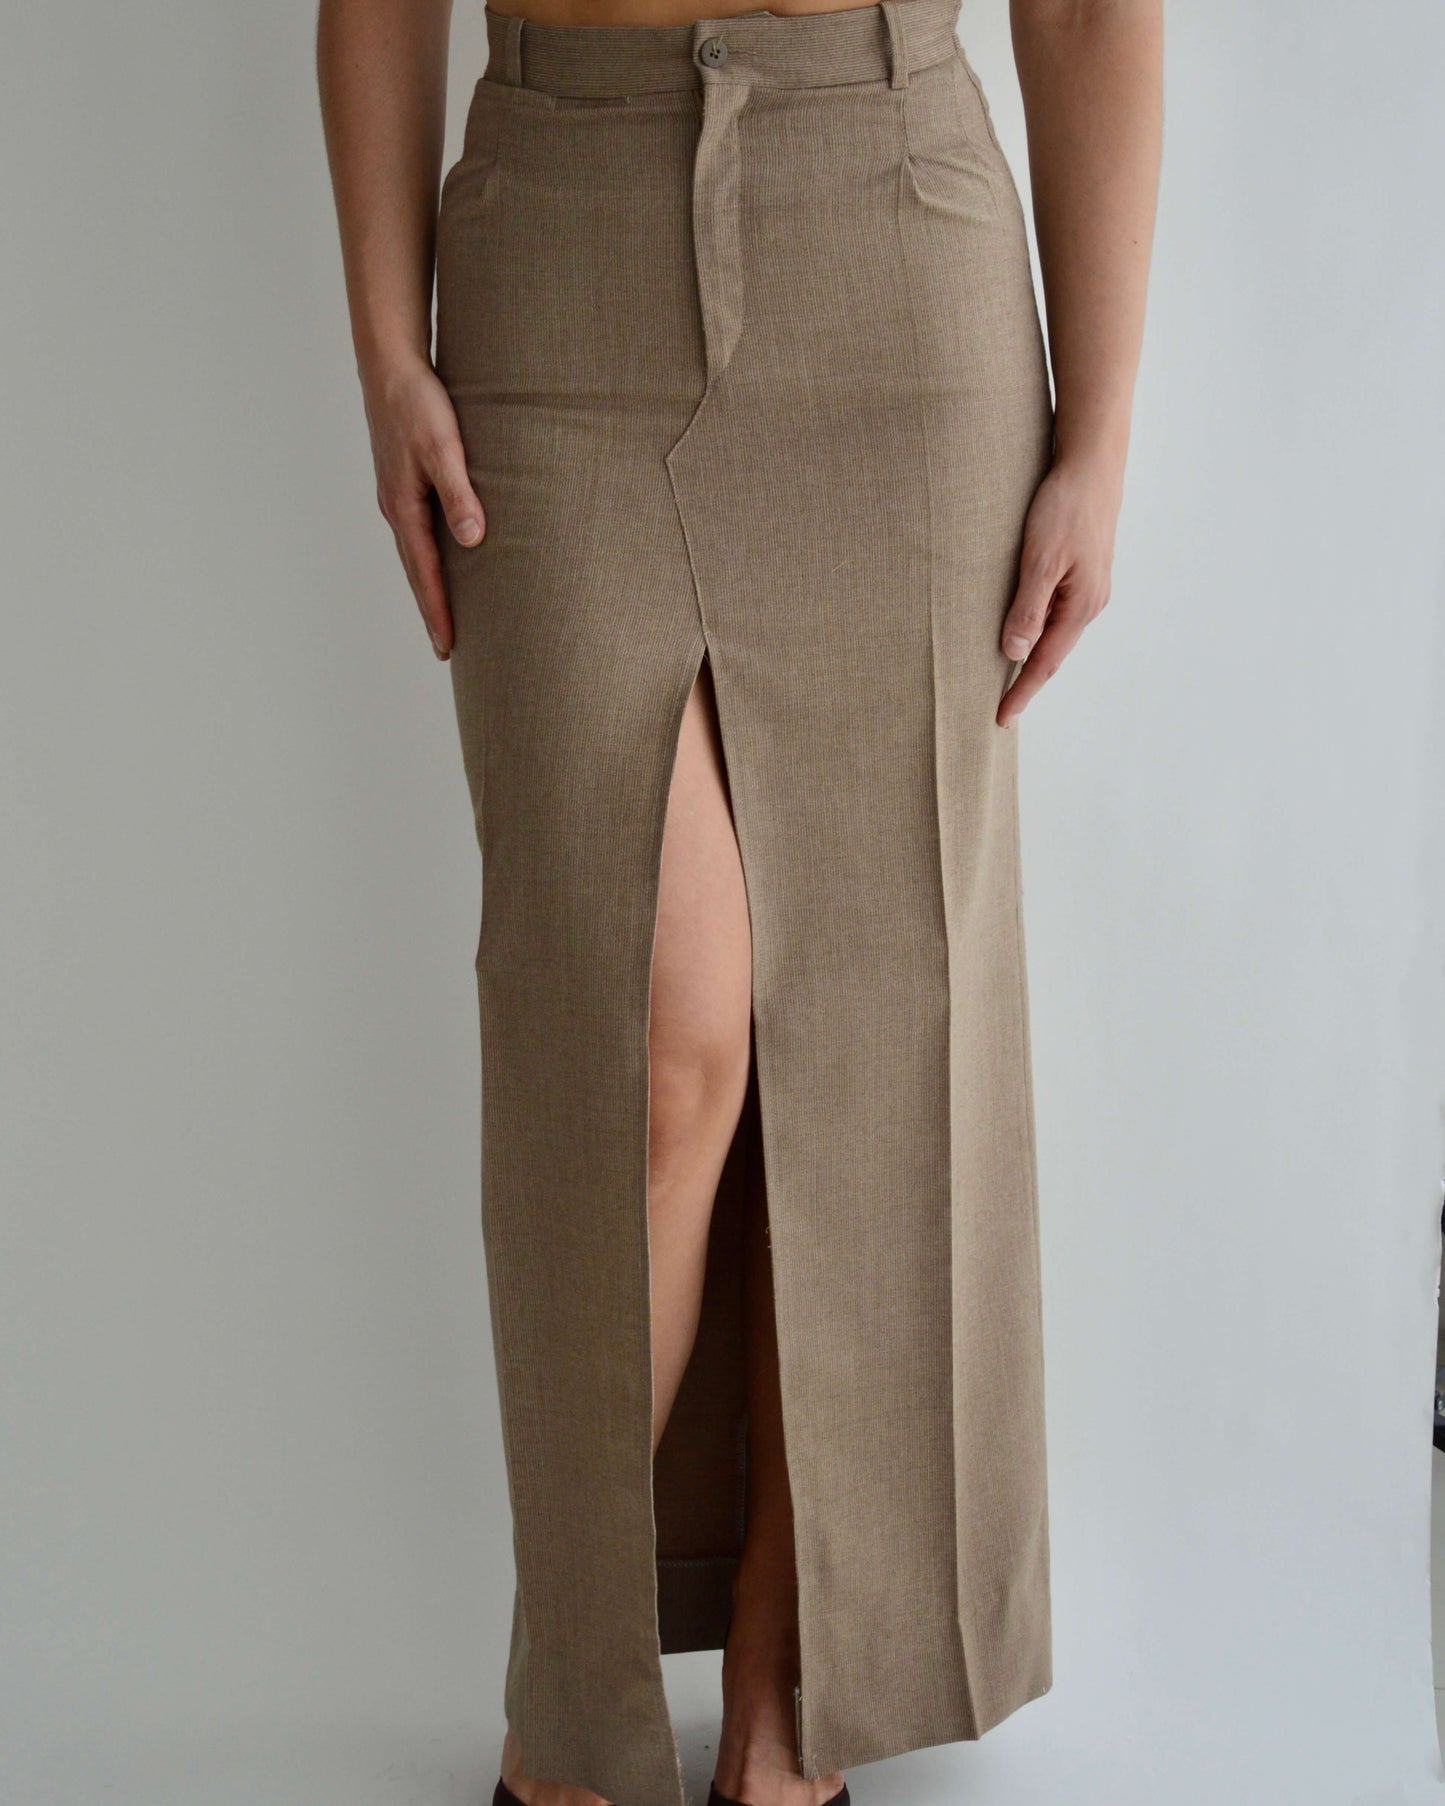 Skirt Suit - Double Breated Brown (XS/S)